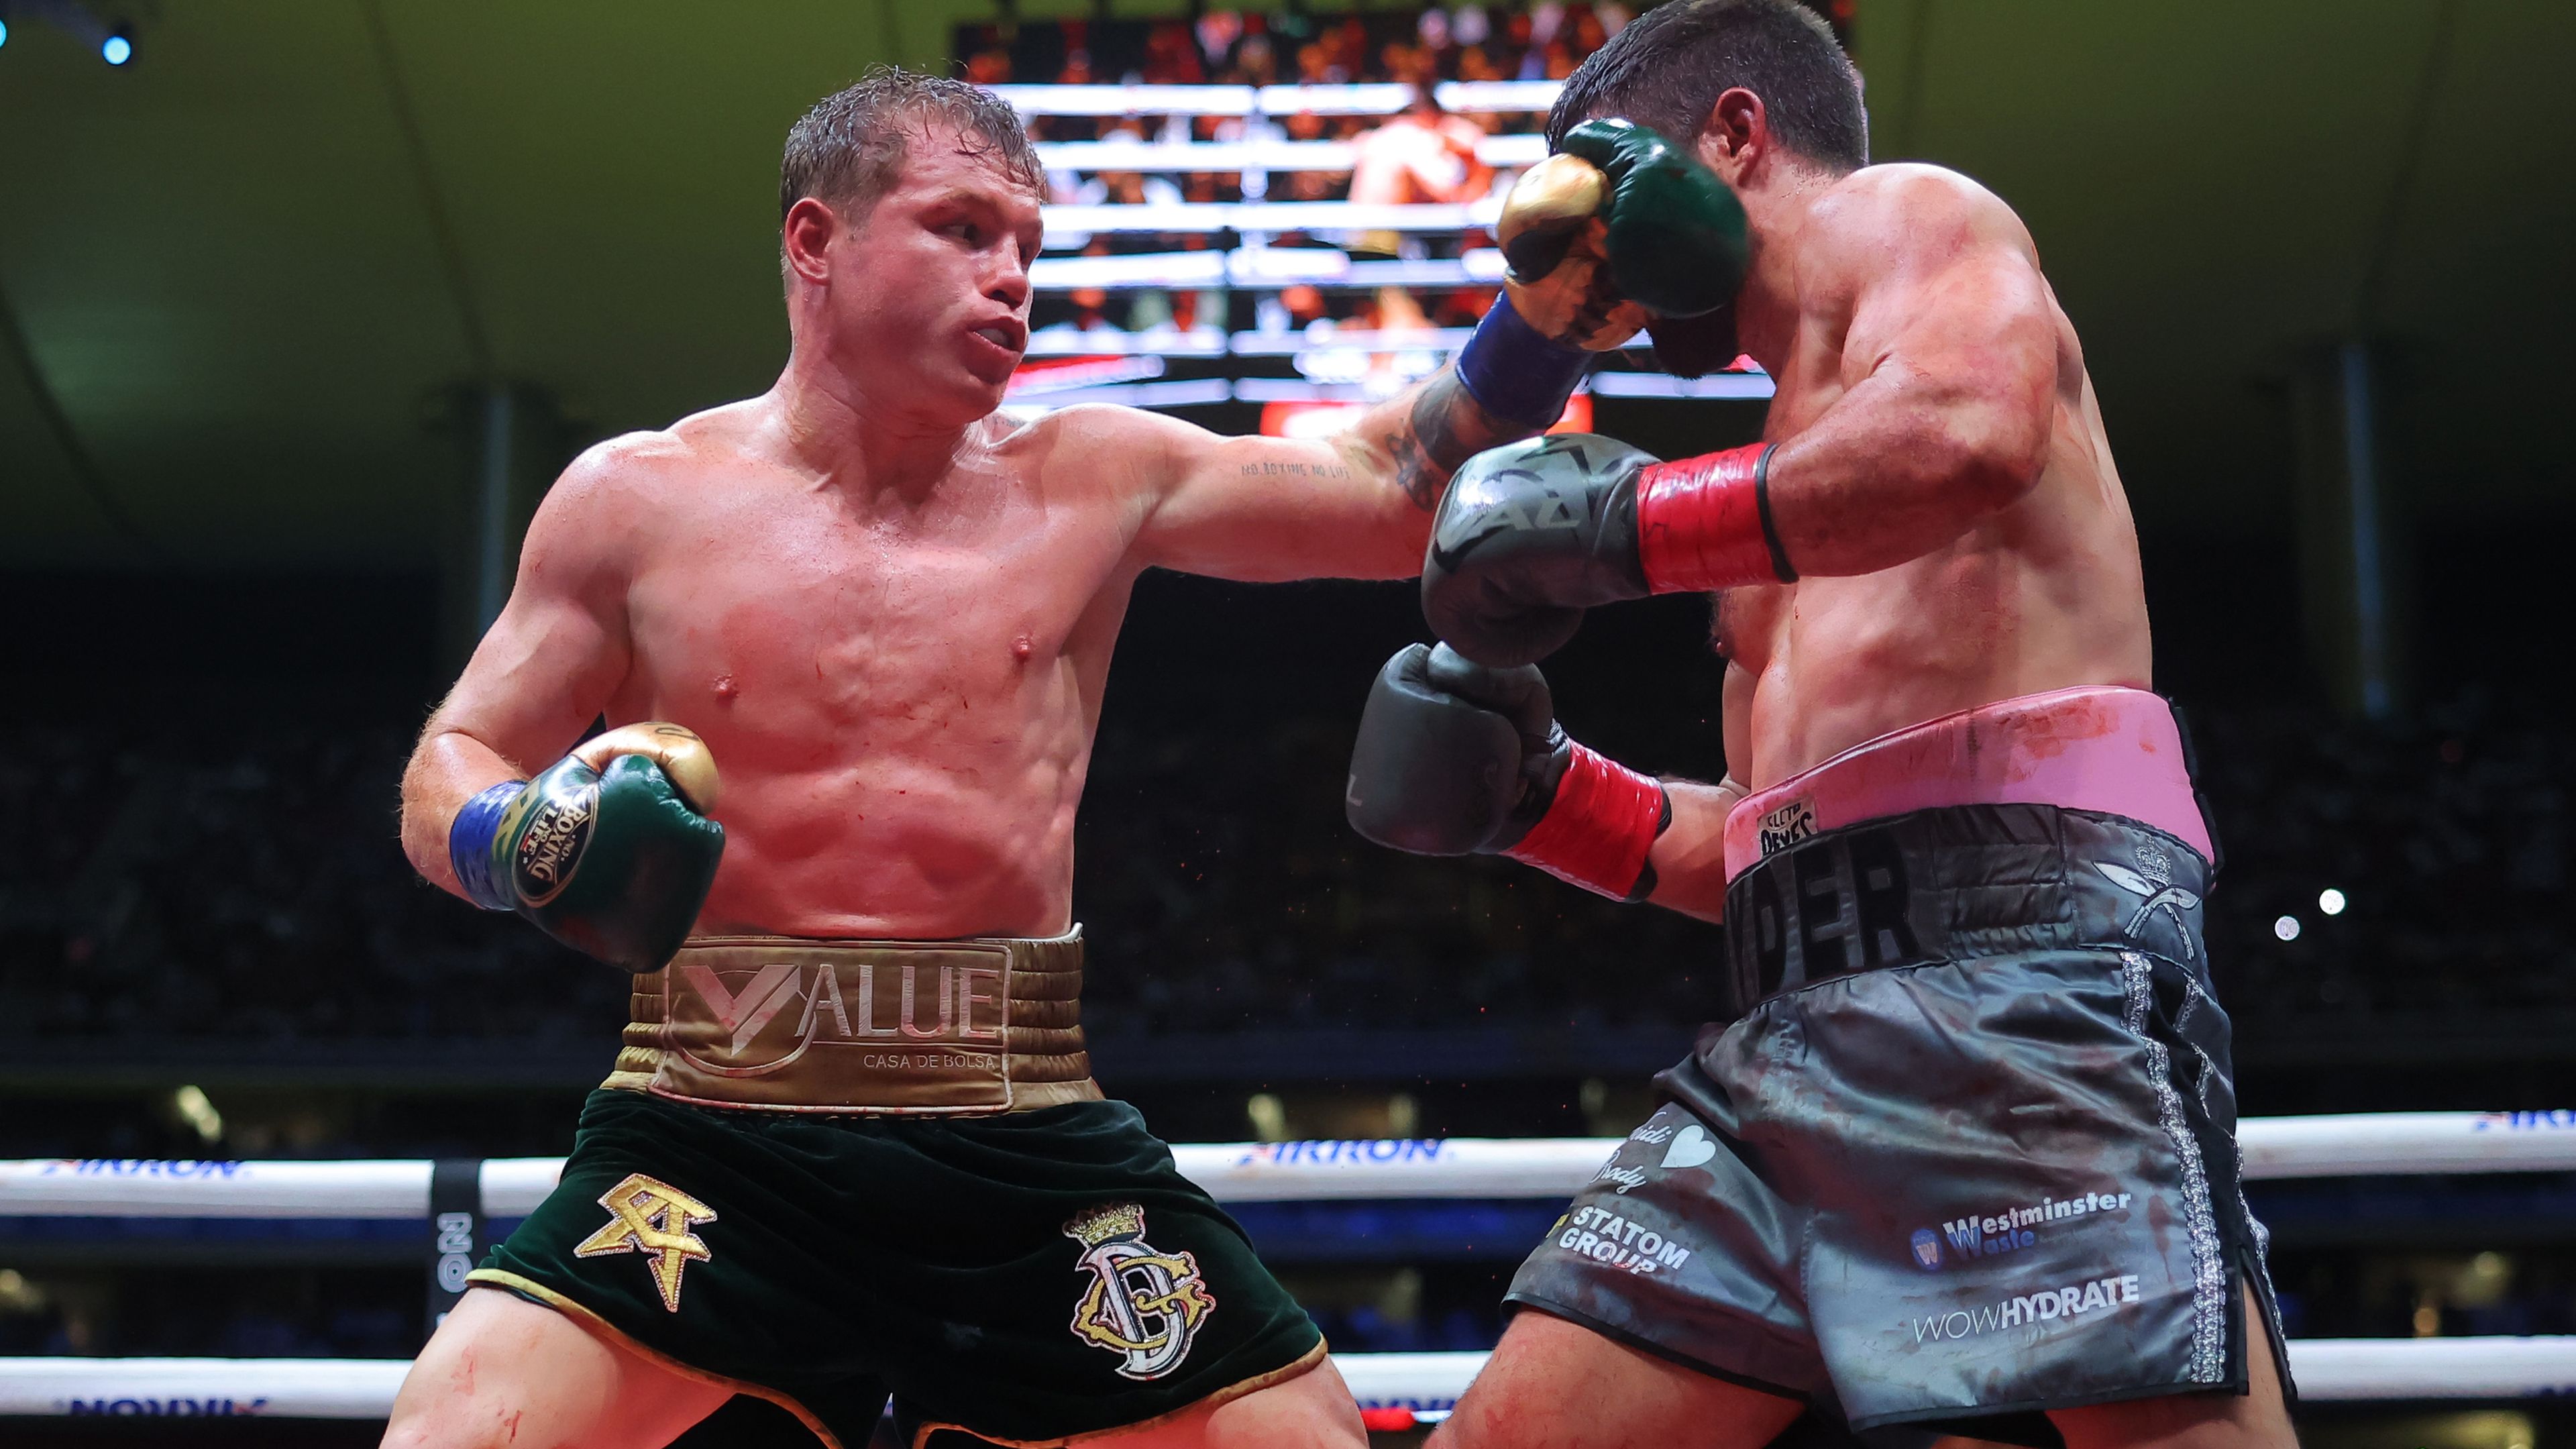 Mexican champ Canelo Alvarez calls out rival after dominant win over John Ryder